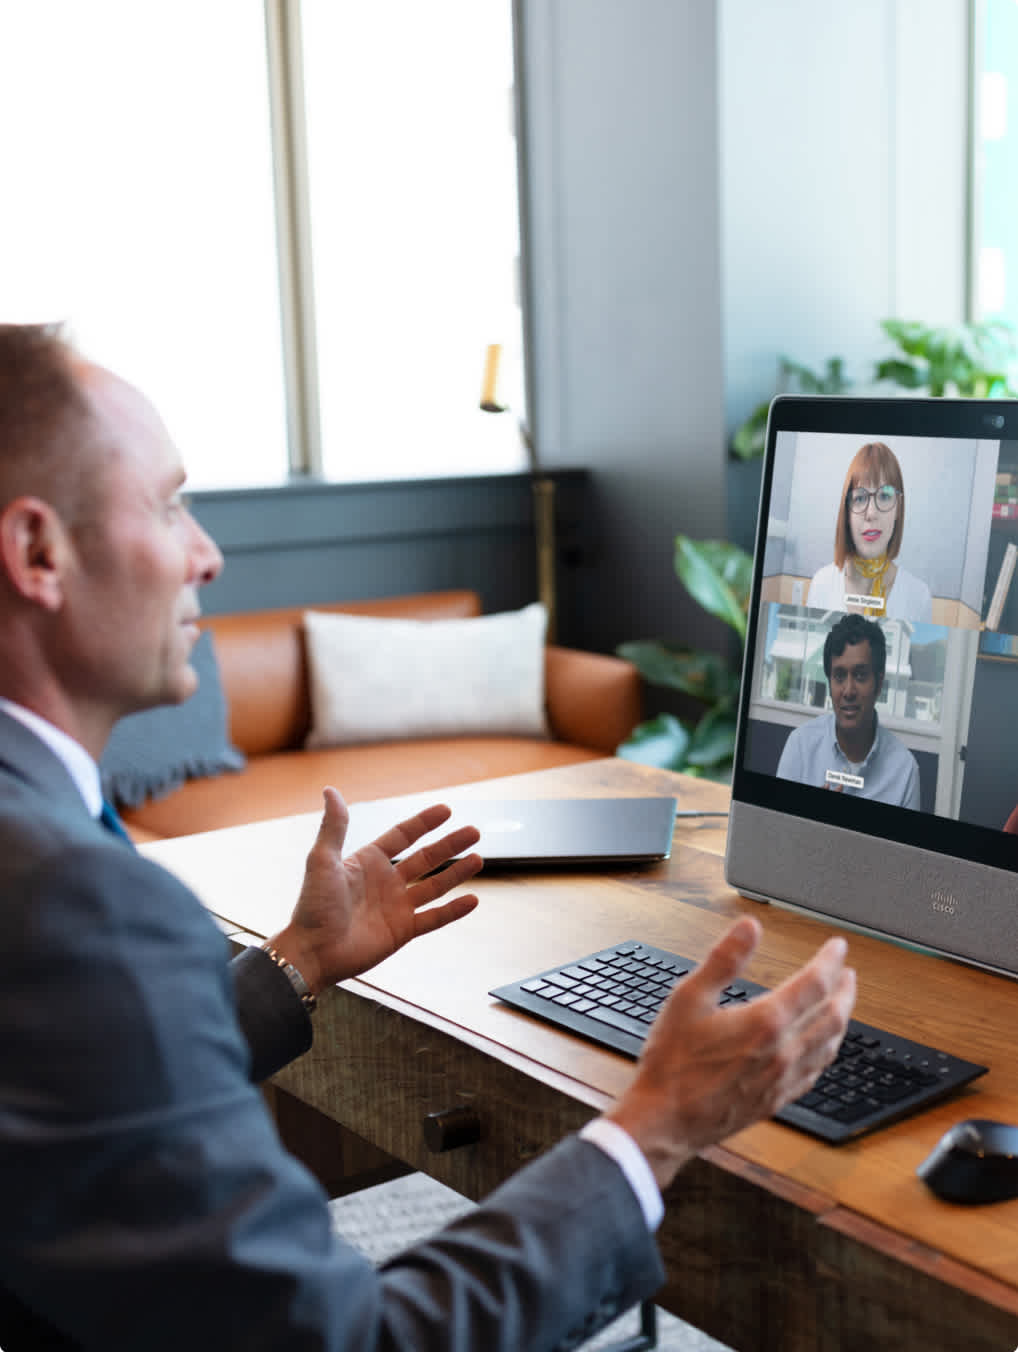 Man in front of a Webex Desk gesticulating while in a video call.